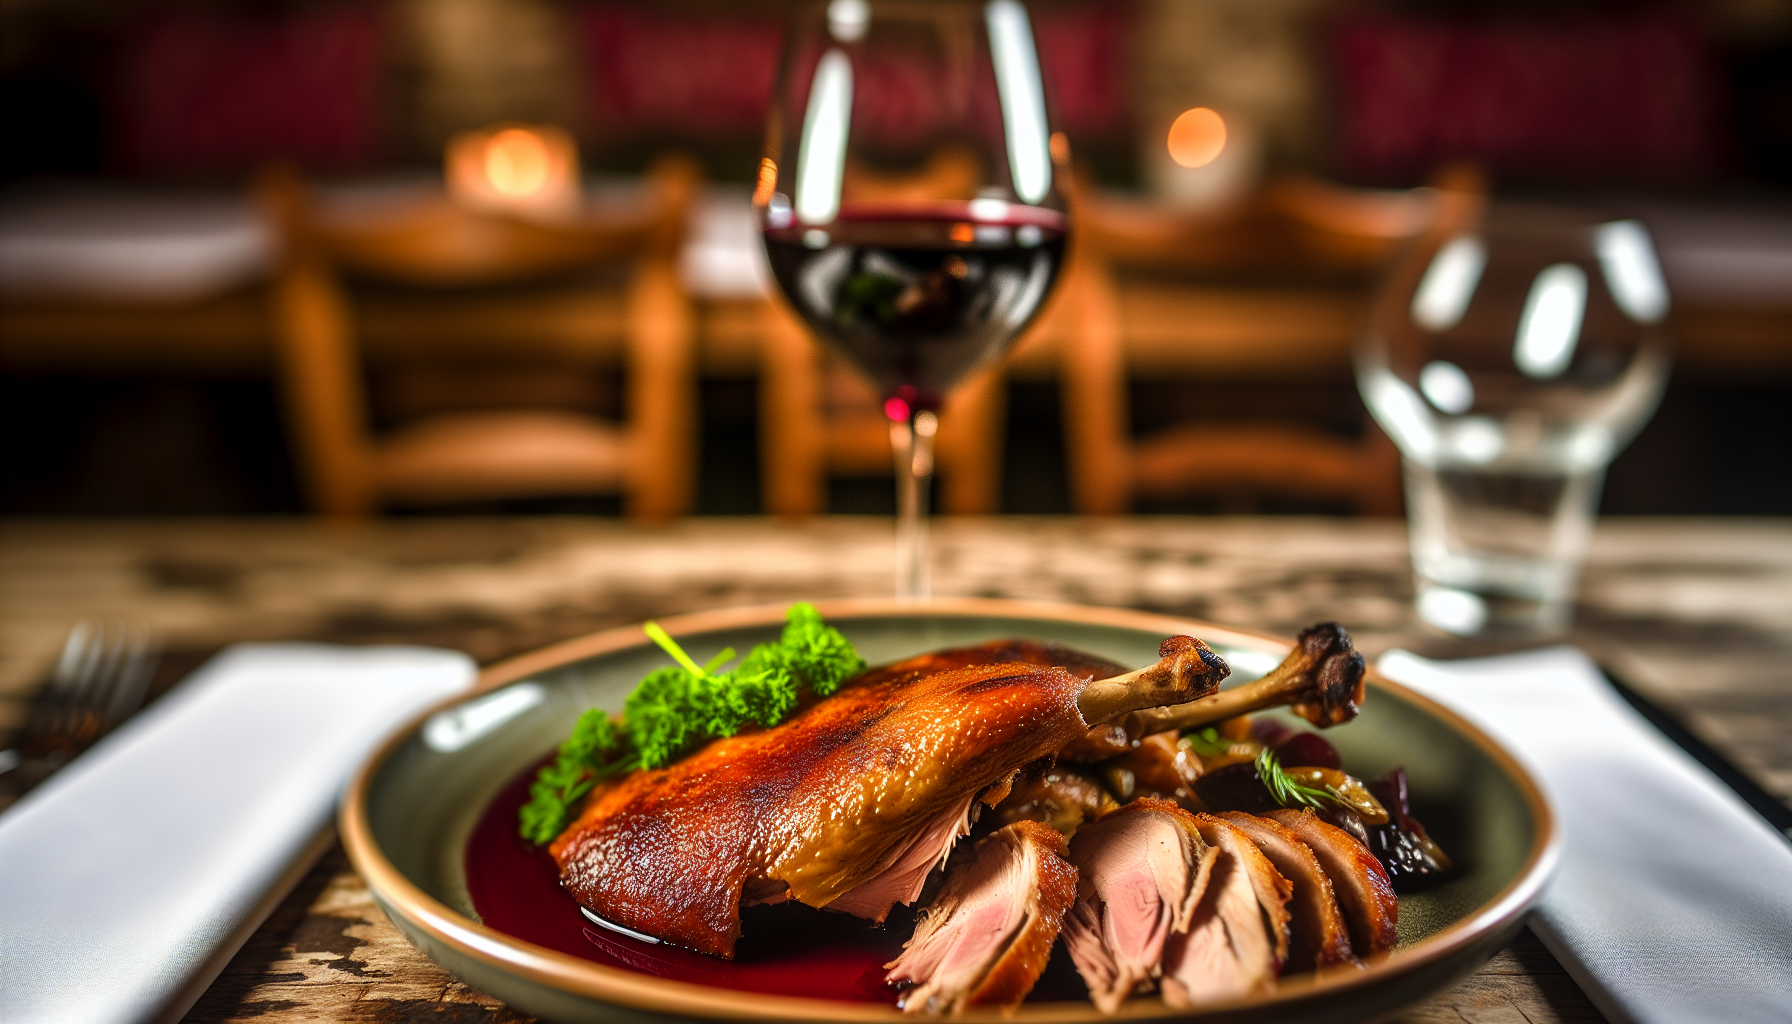 A serving of roast duck with a glass of Burgundy Pinot Noir